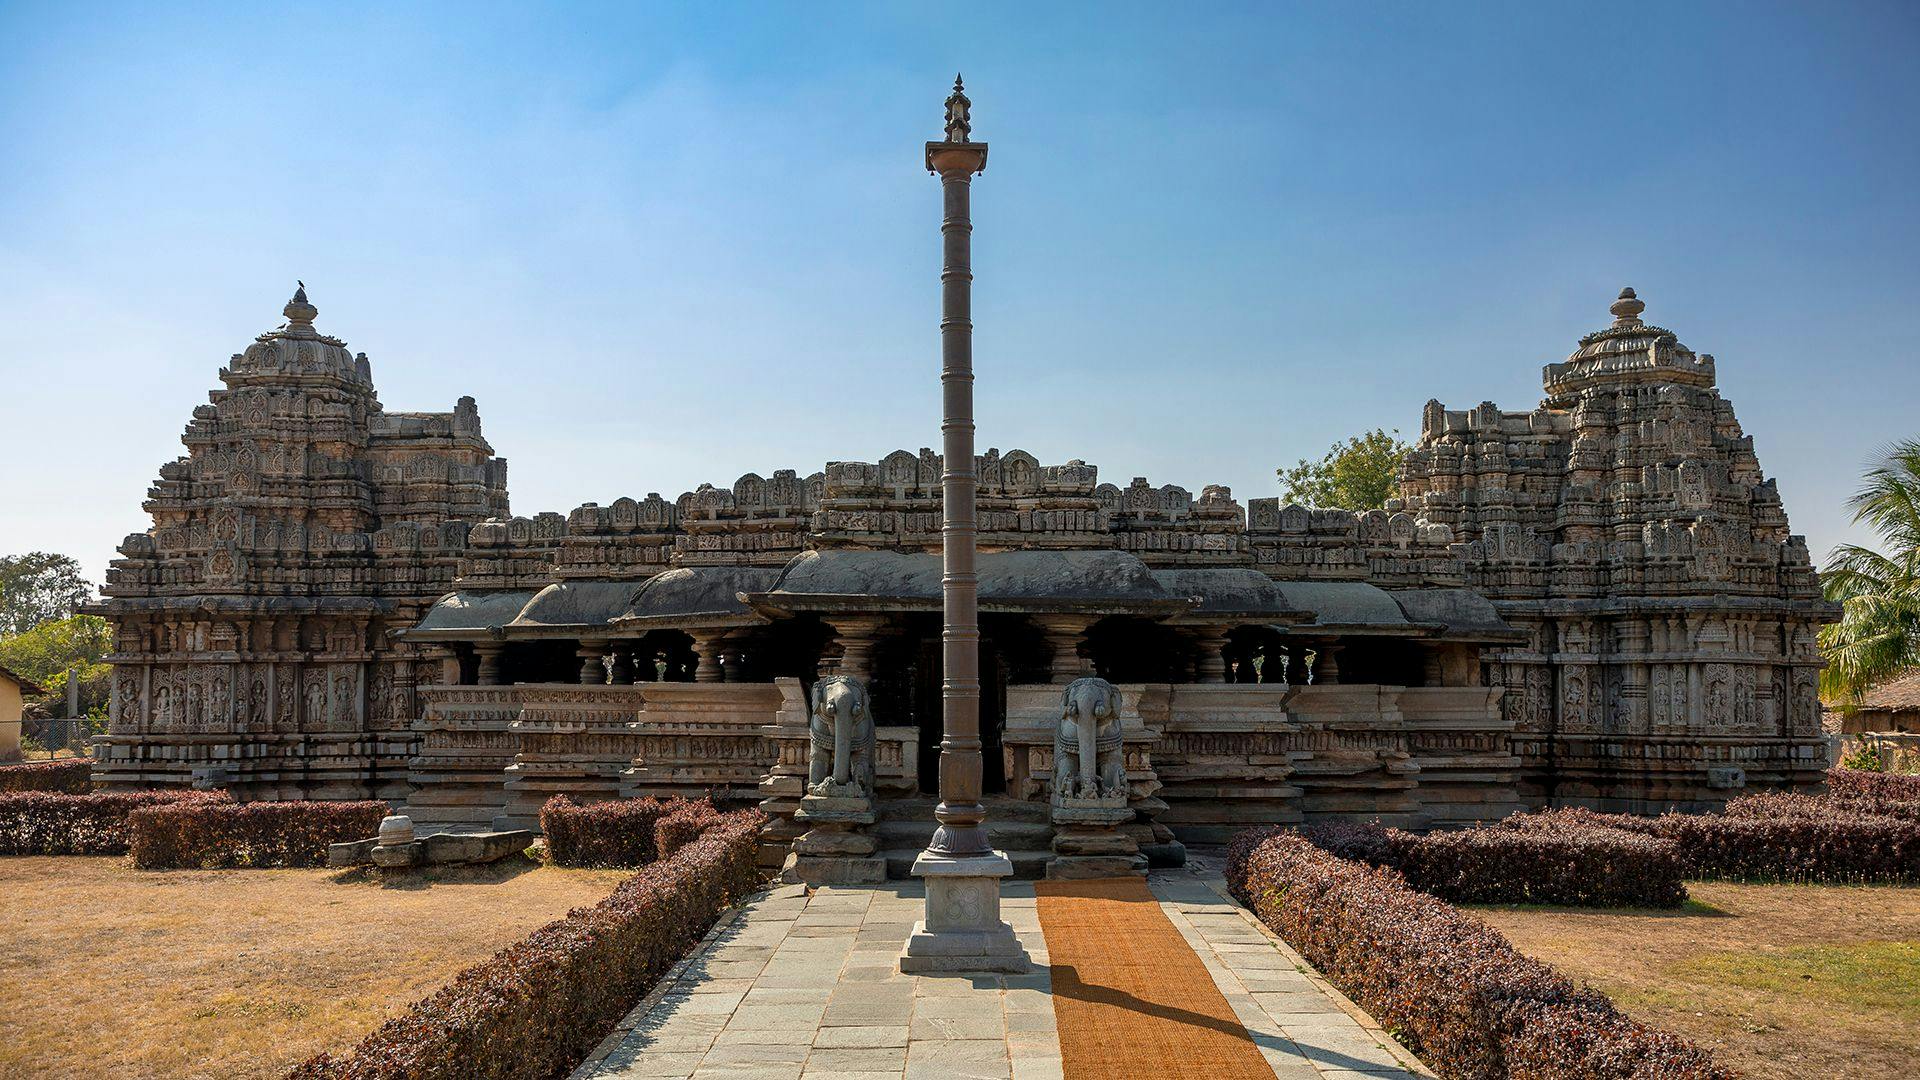 The Forgotten Temples of the Hoysalas